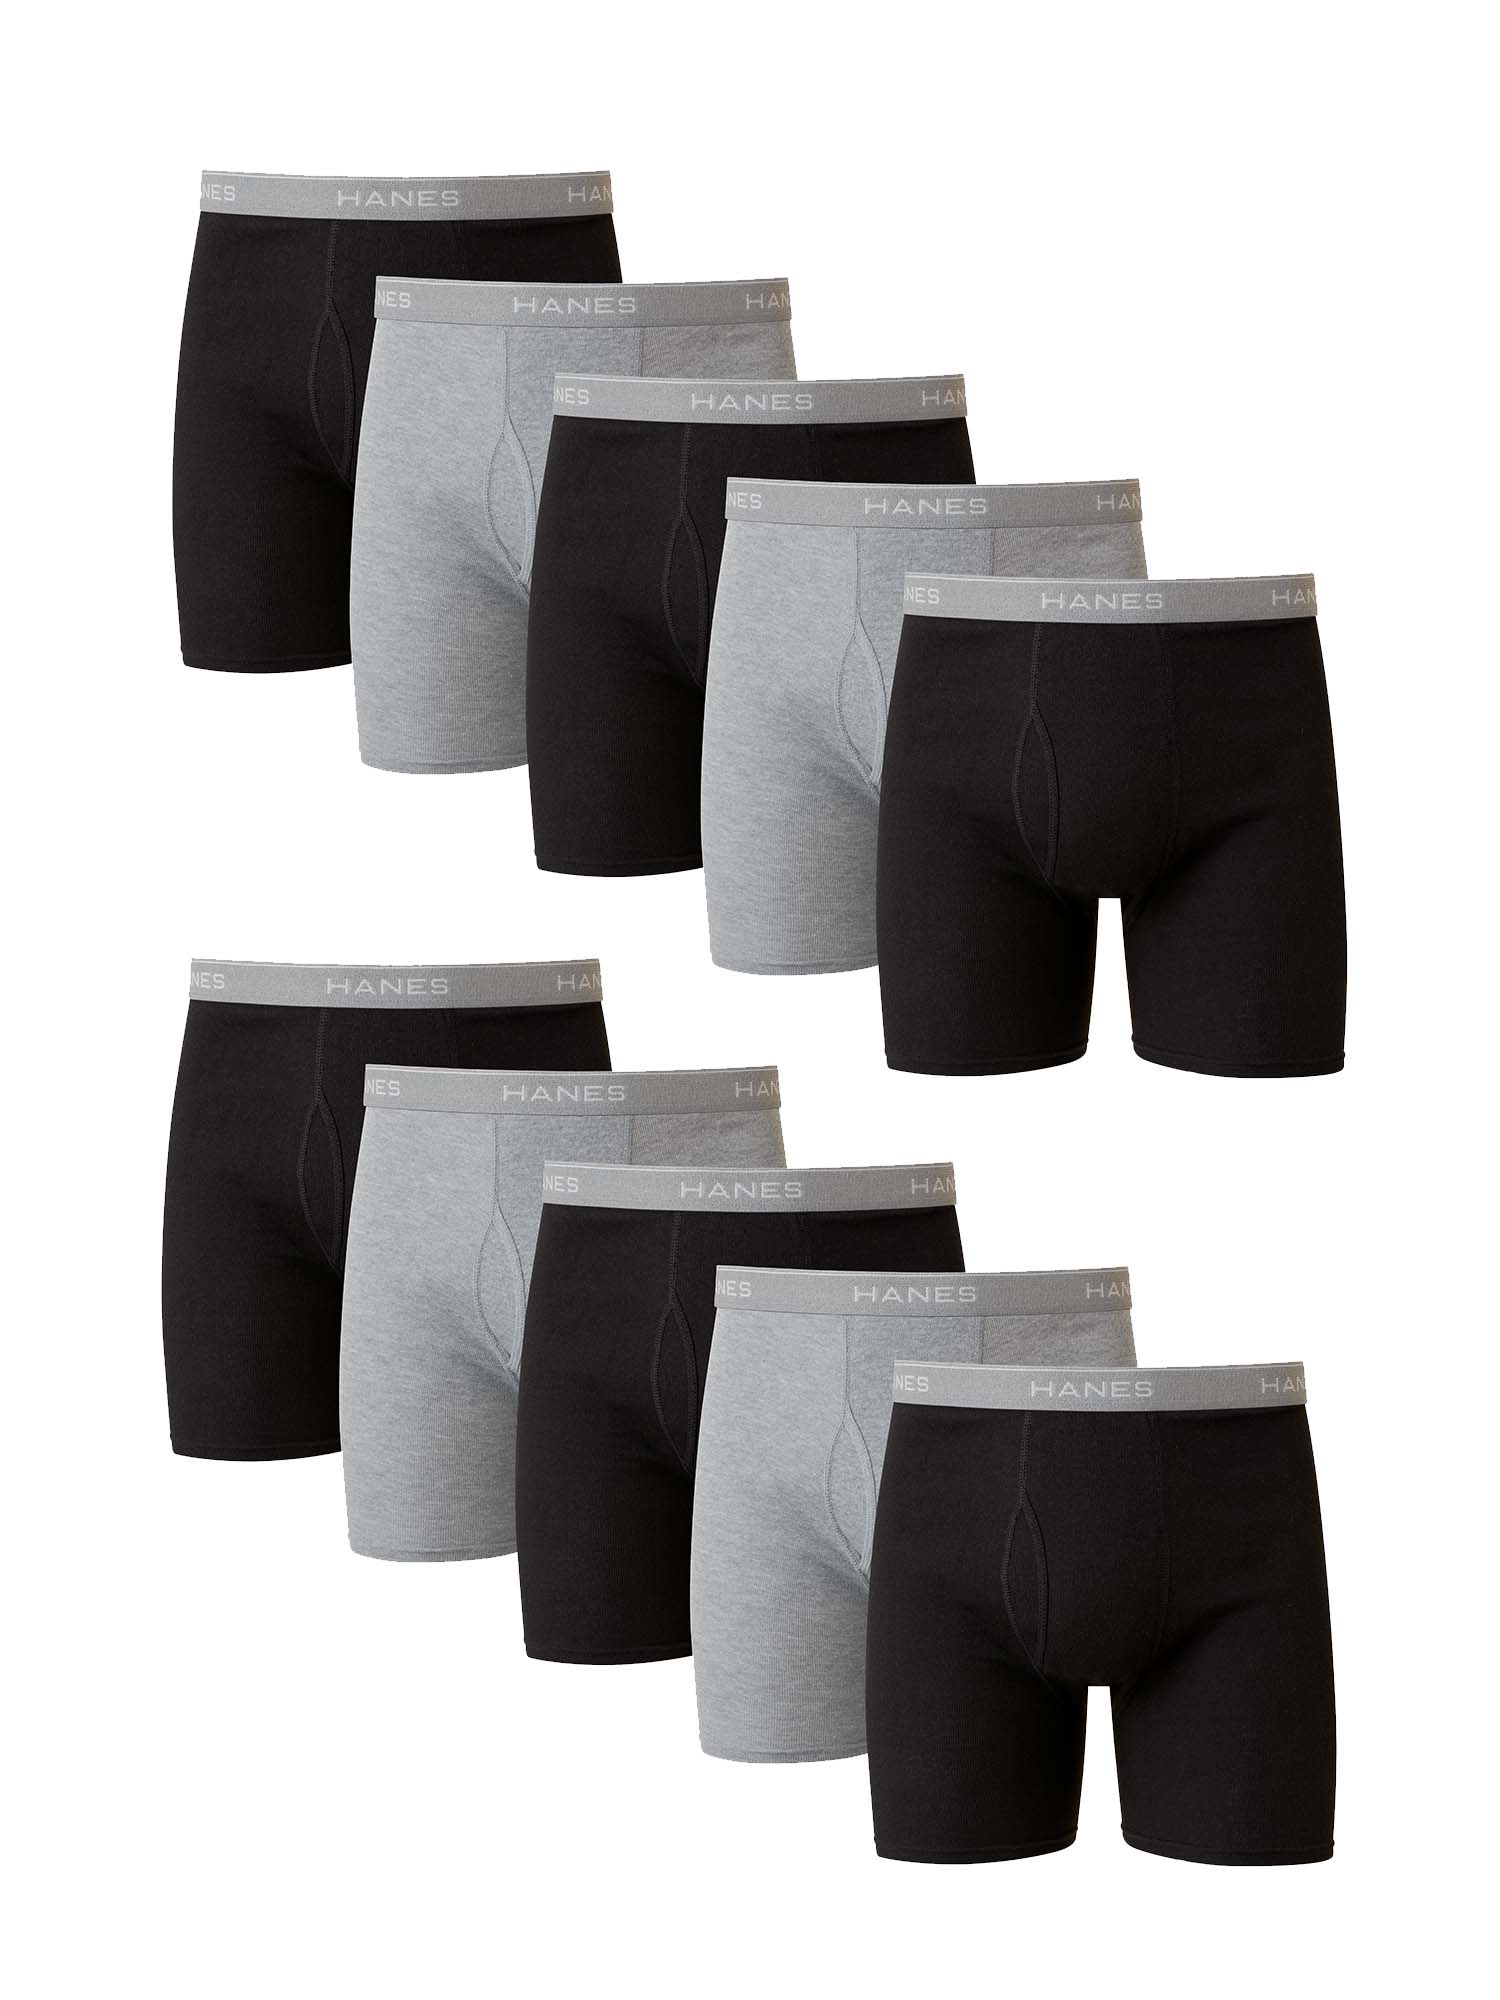 10-Pack Hanes Men's Covered Waistband Boxer Briefs (various colors)